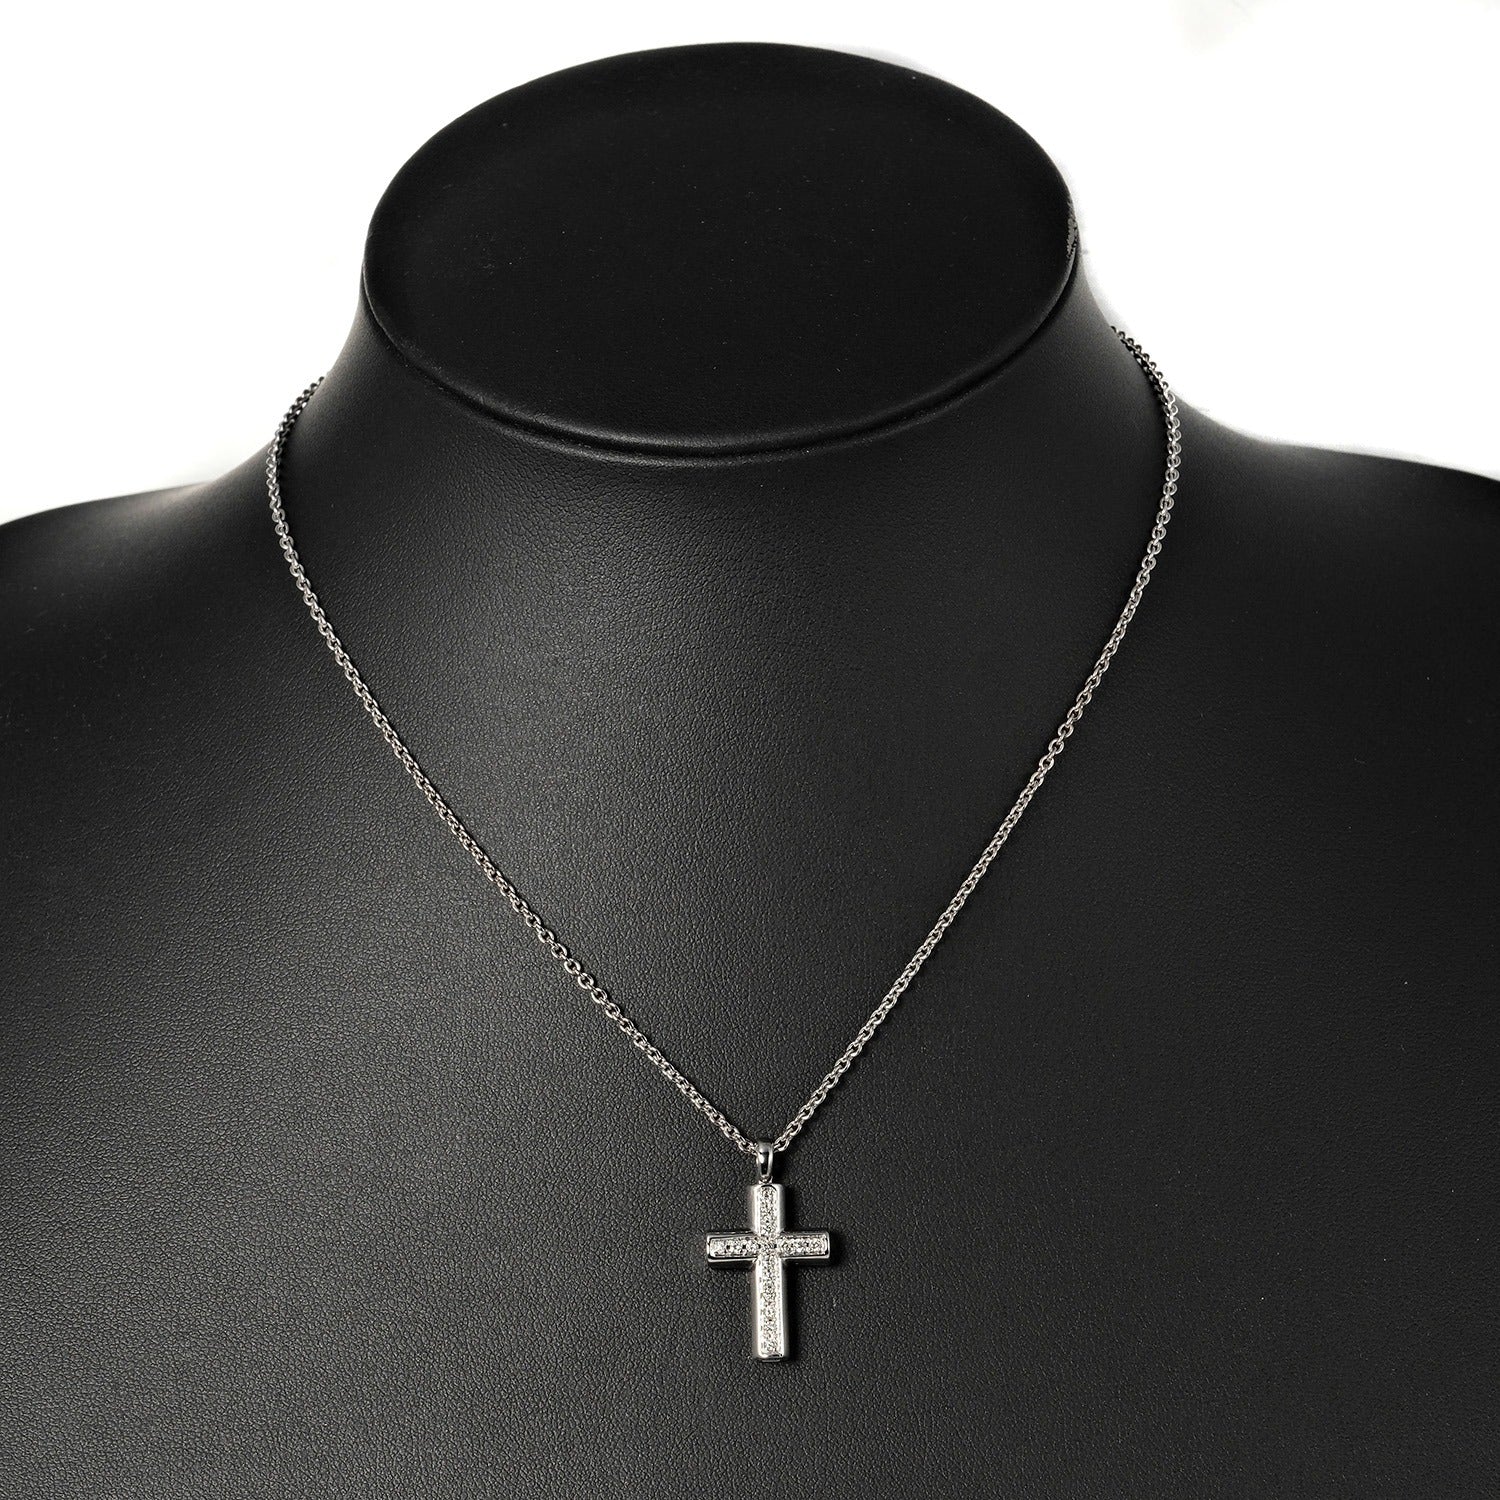 BVLGARI Latin Cross Necklace, 9.53g, K18 White Gold with Diamond Accents